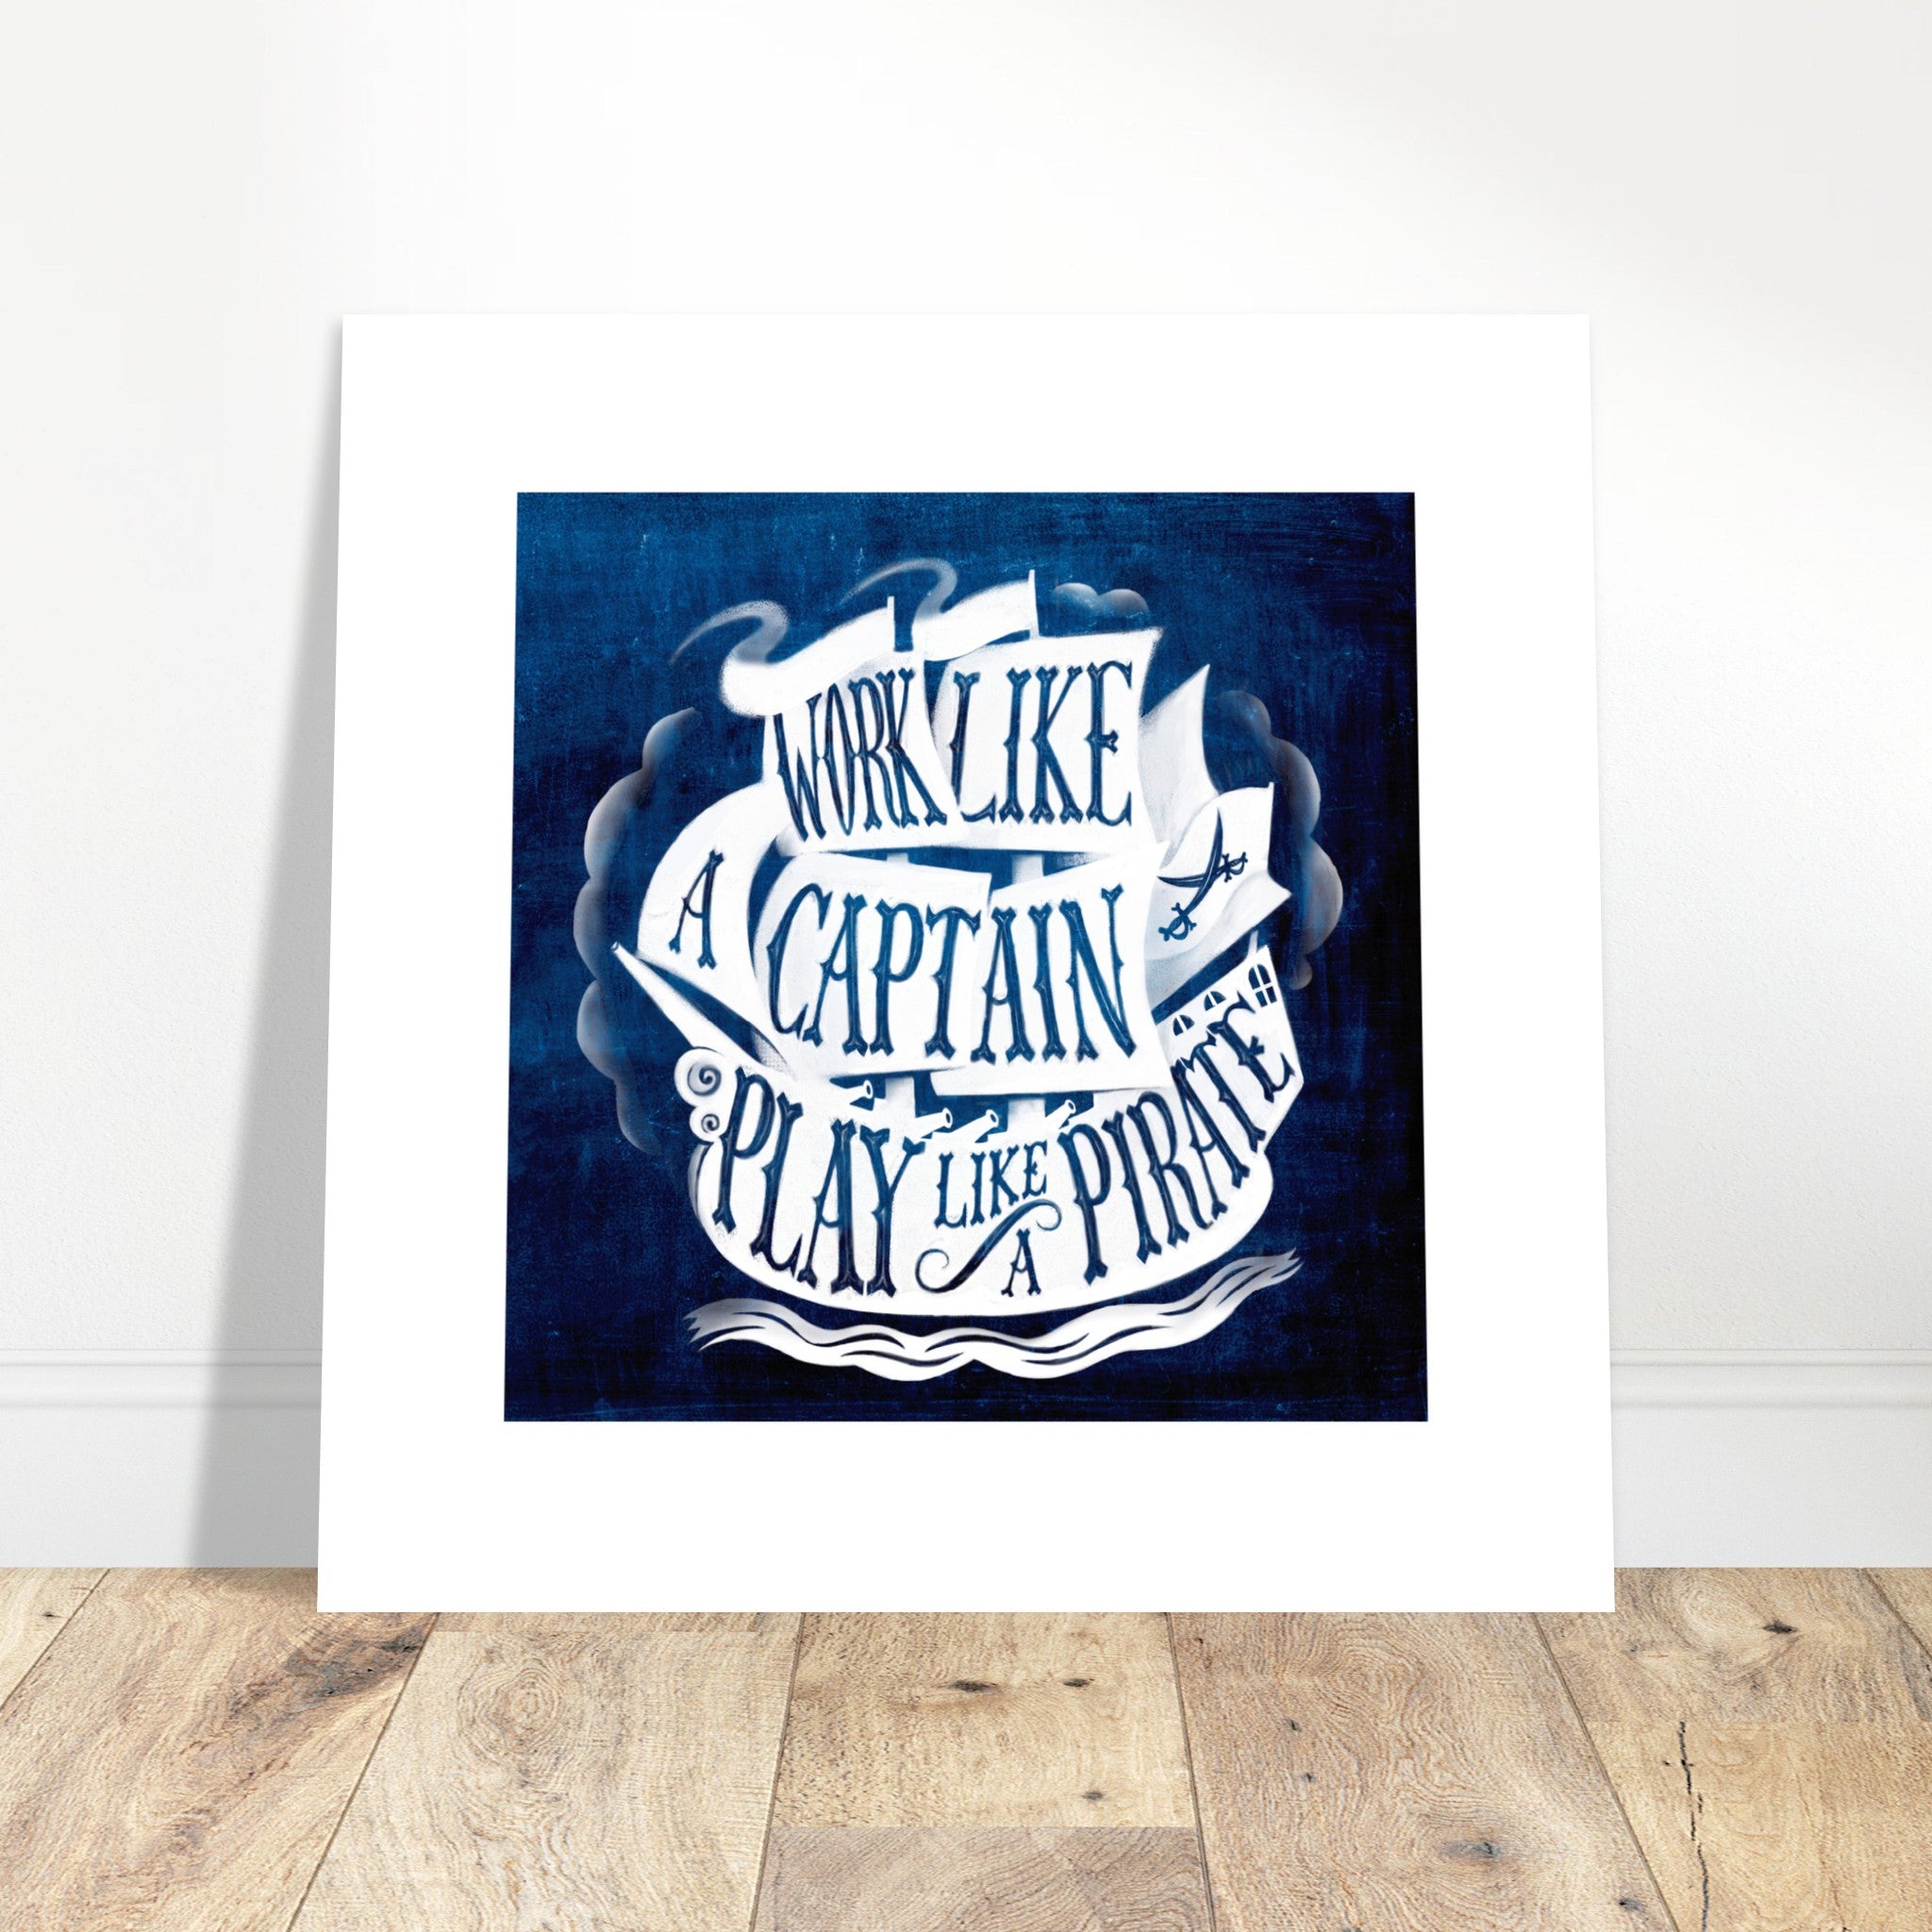 Work Like A Captain Play Like A Pirate Quote Poster